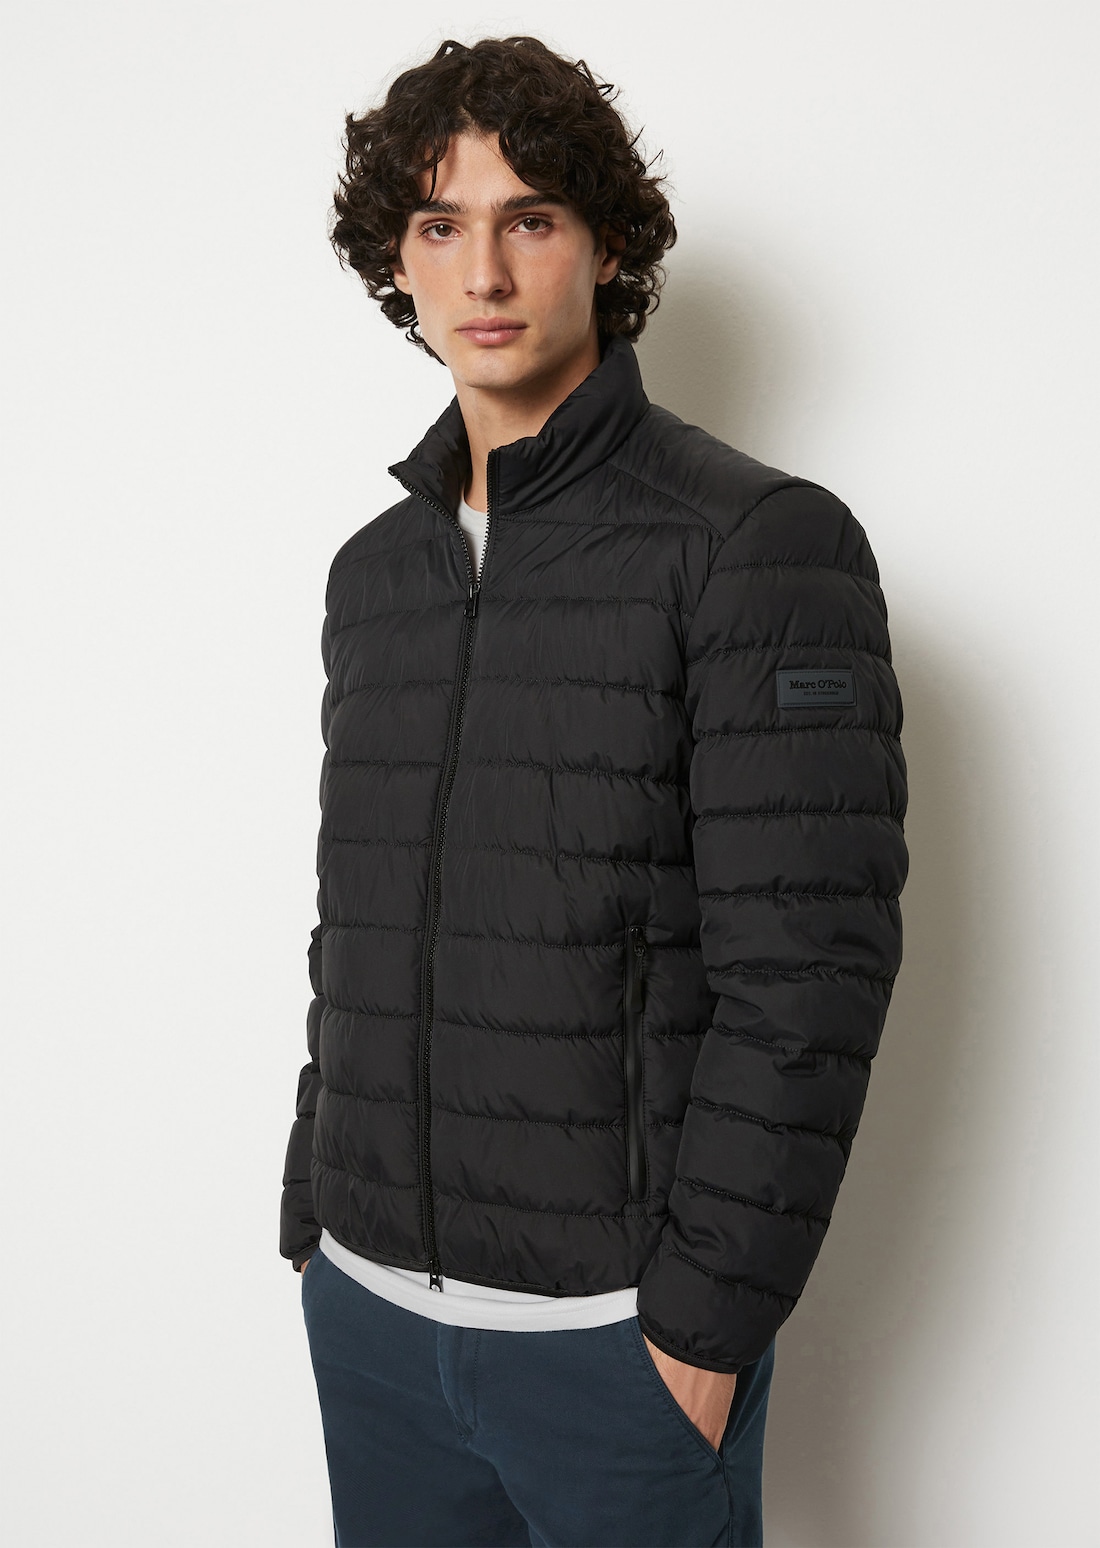 Quilted jacket regular made of recycled fabric - black, Jackets